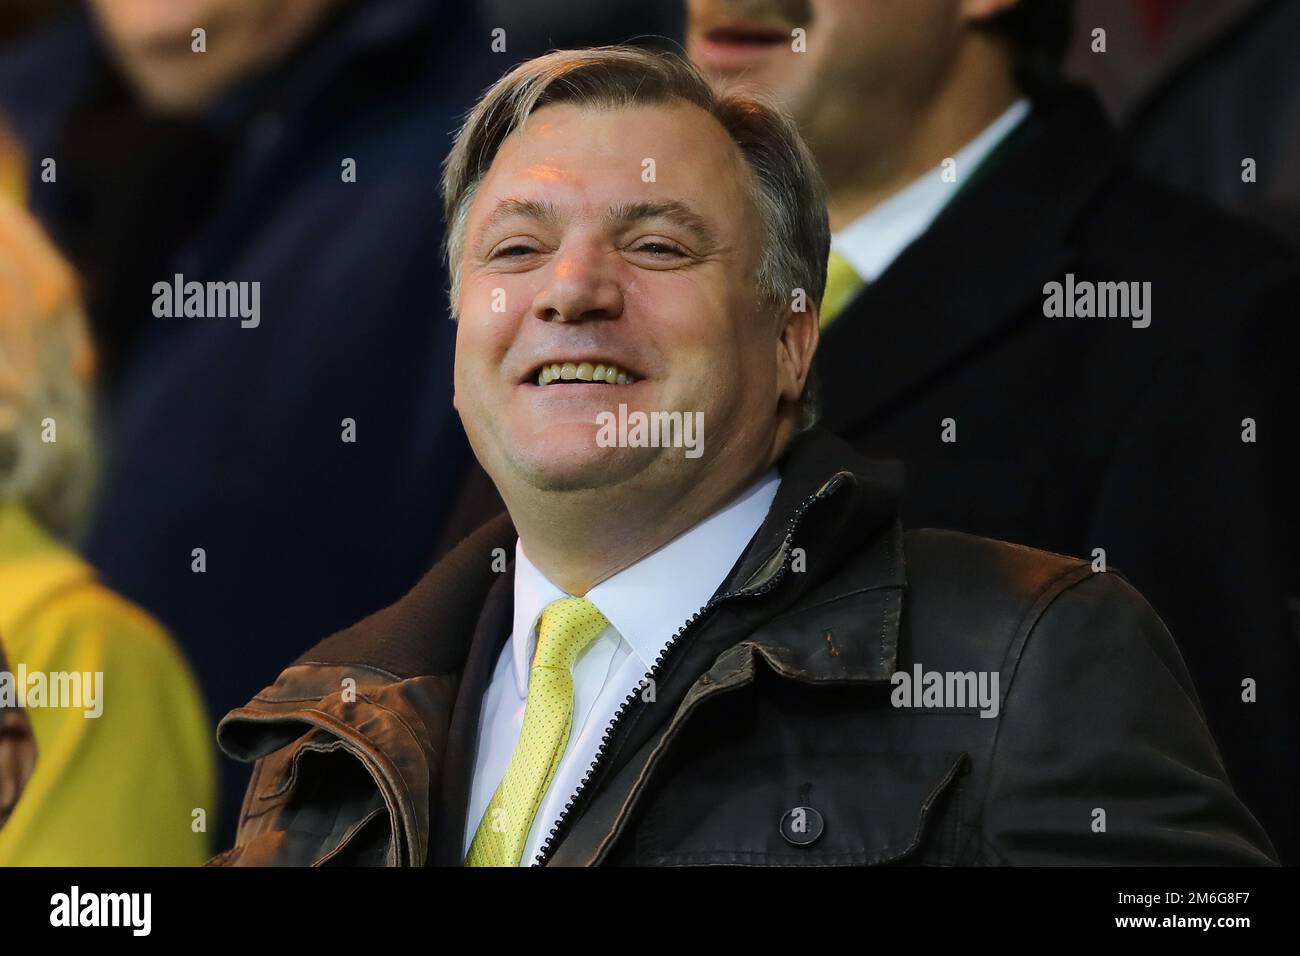 Chairman of Norwich City, Ed Balls looks on in his first game at Carrow Road since leaving Strictly Come Dancing - Norwich City v Brentford, Sky Bet Championship, Carrow Road, Norwich - 3rd December 2016. Stock Photo